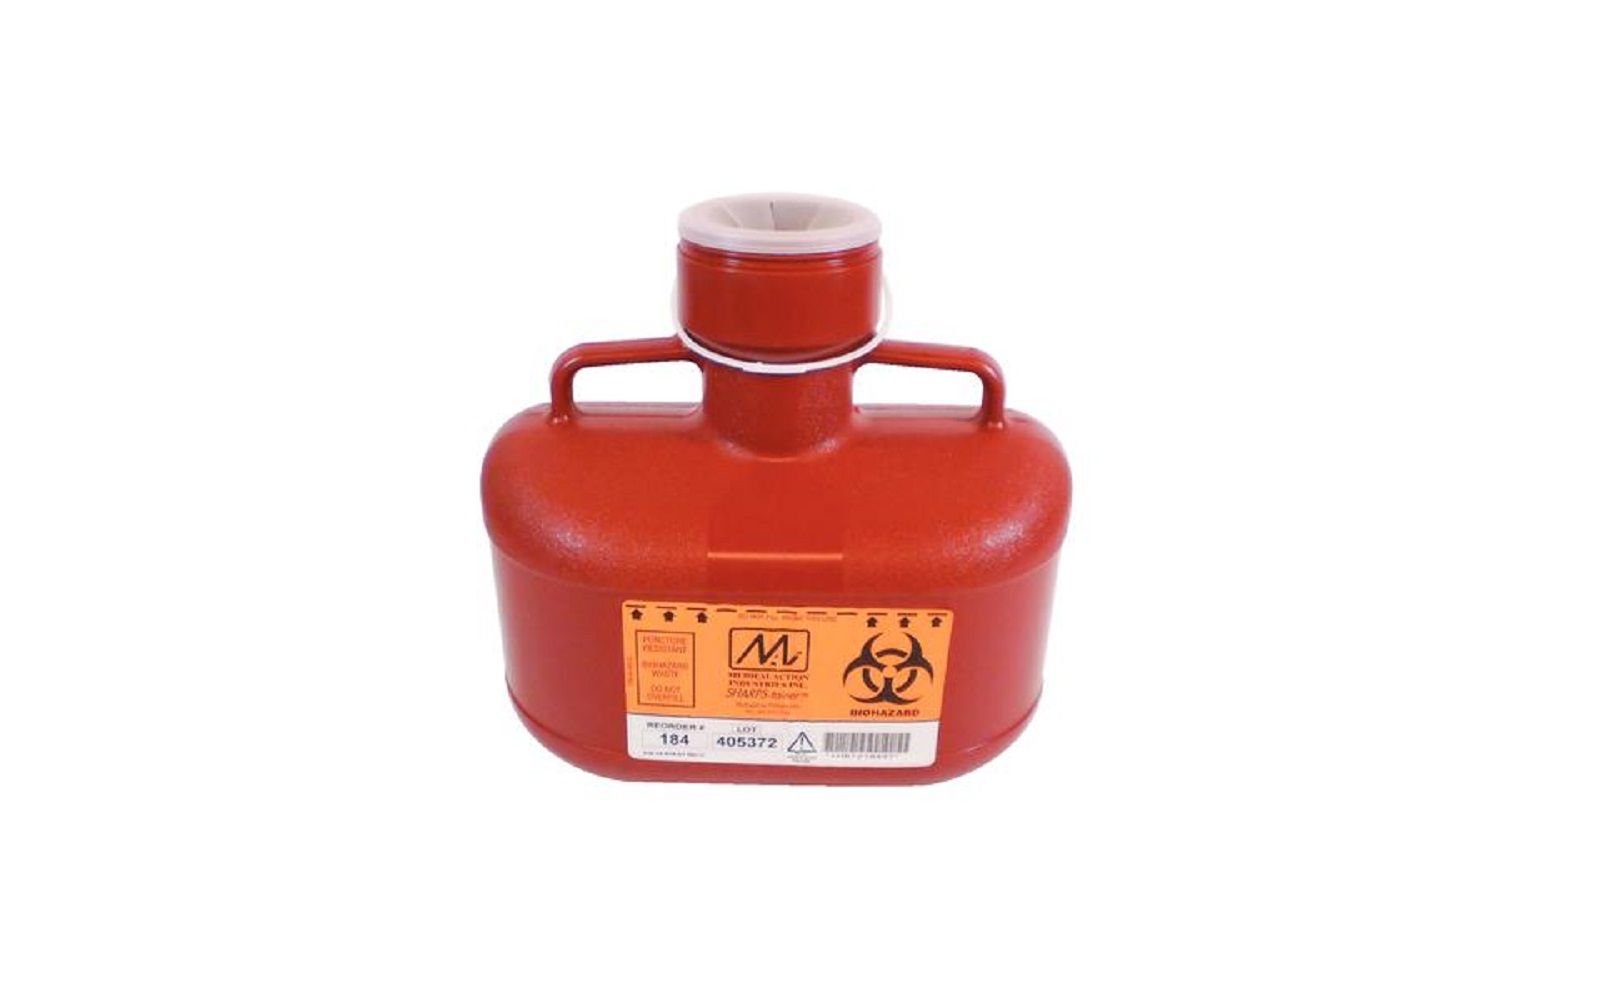 Nonstackable sharps containers polypropylene red - small, locking cap without needle remover, 4. 8 qt